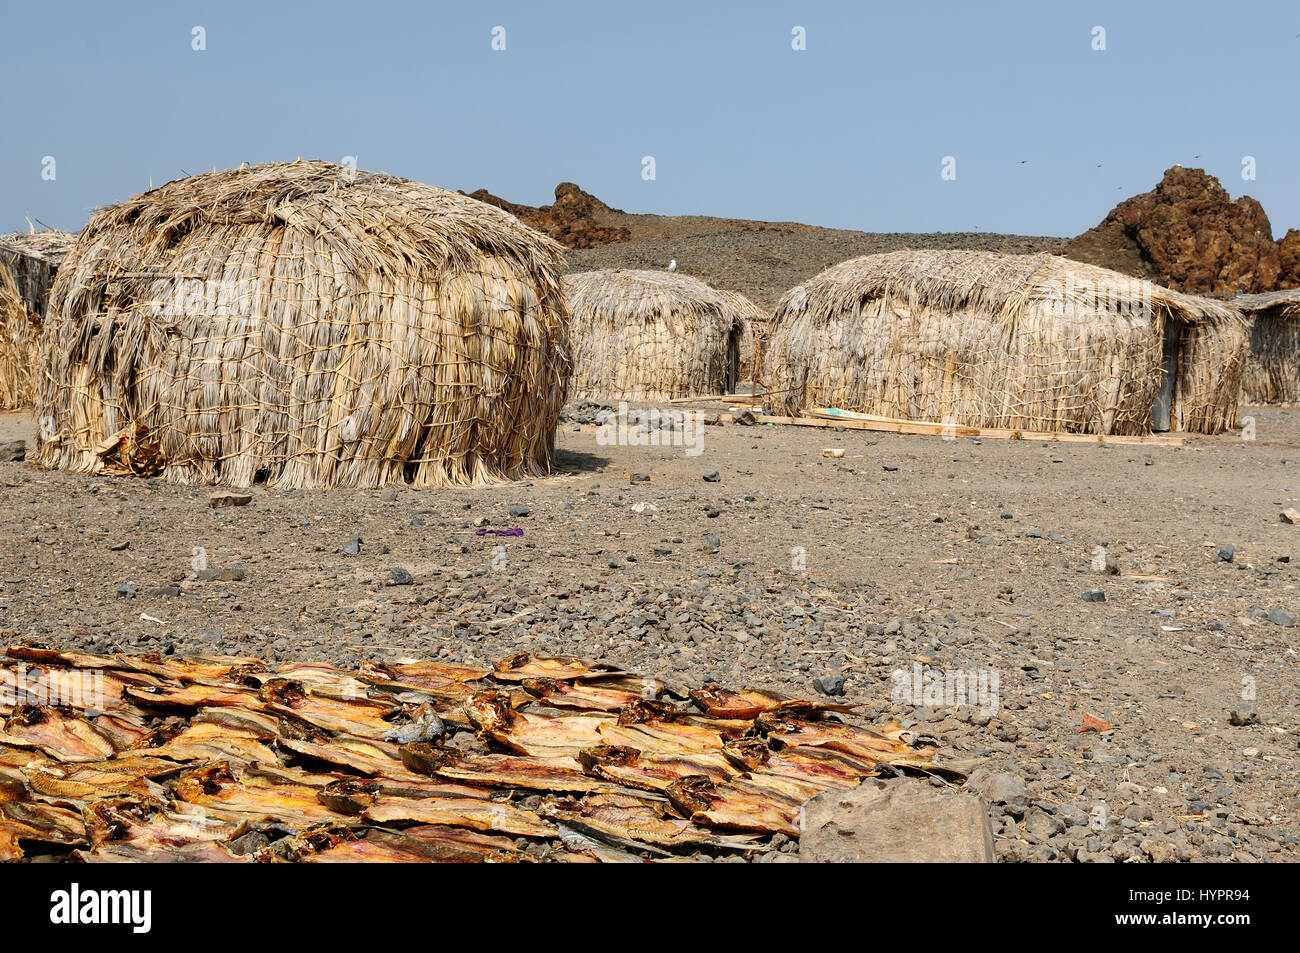 Traditional round house of people from the El Molo tribe on the shore of the lake Turkana in Kenya Stock Photo